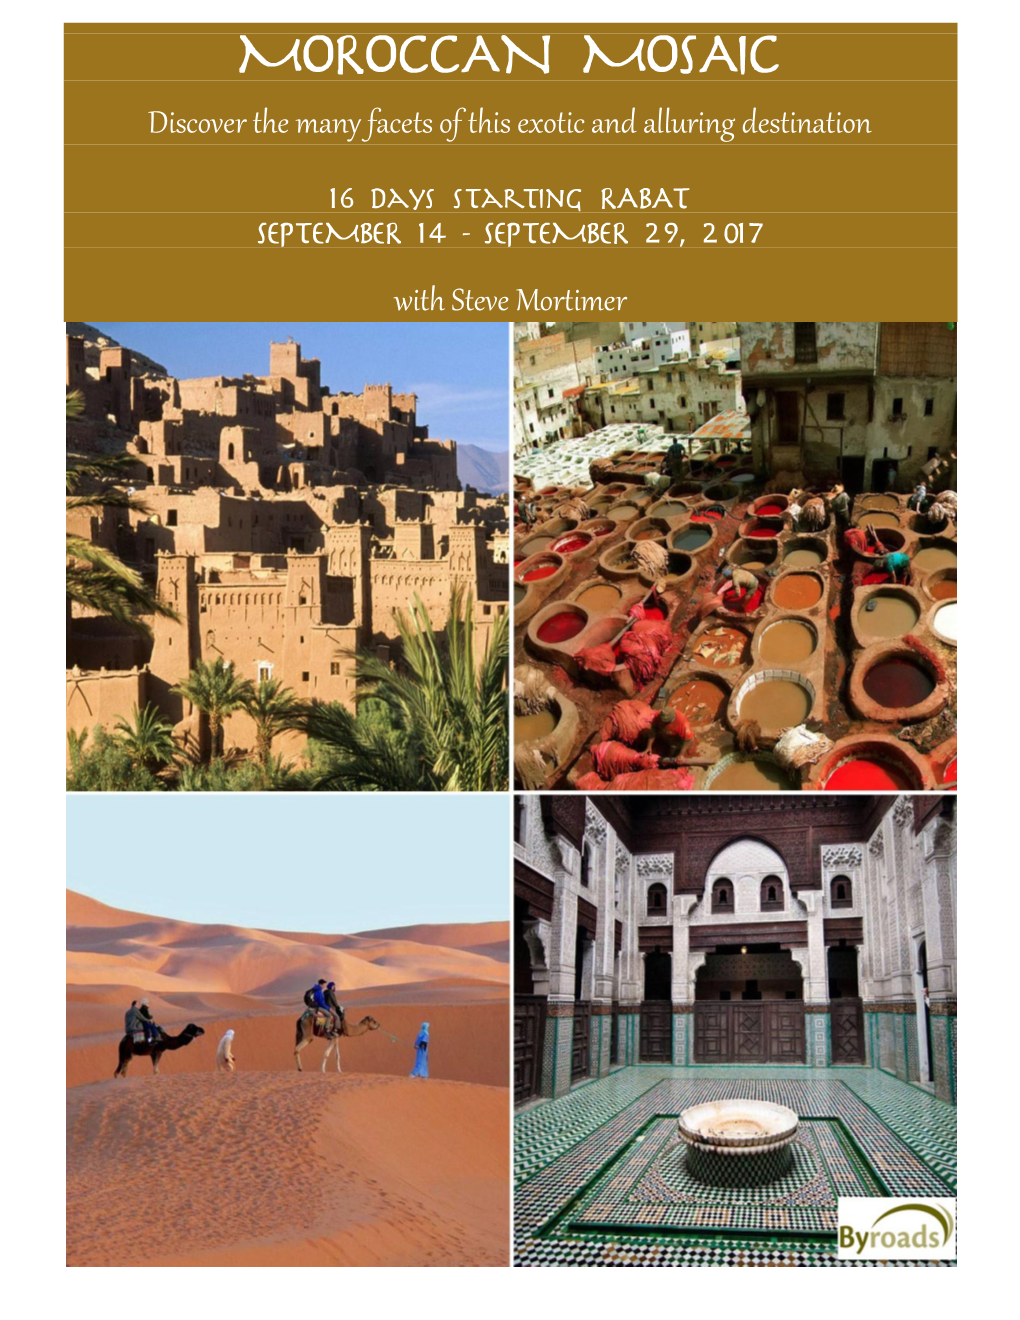 MOROCCAN MOSAIC Discover the Many Facets of This Exotic and Alluring Destination